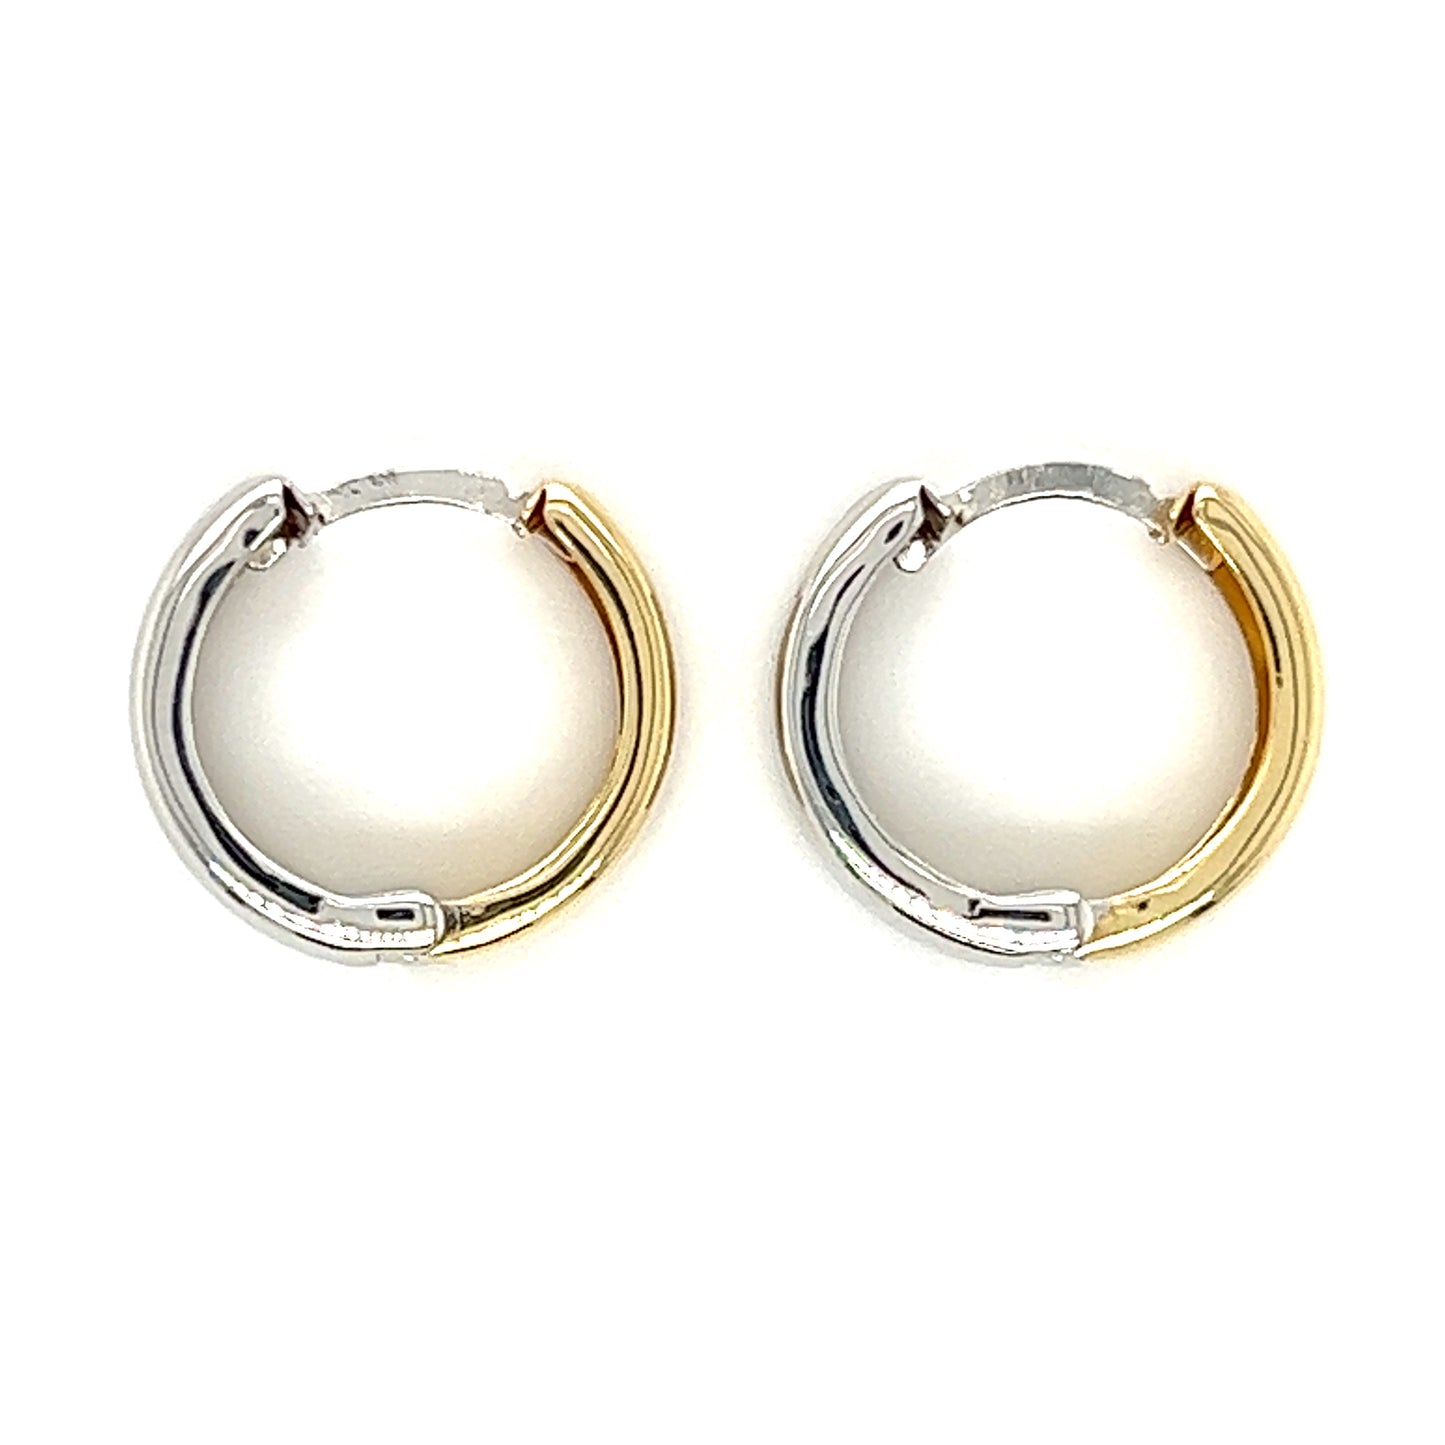 Reversible Hoop Earrings 4.7mm in 14K White and Yellow Gold Side view showing yellow and white.